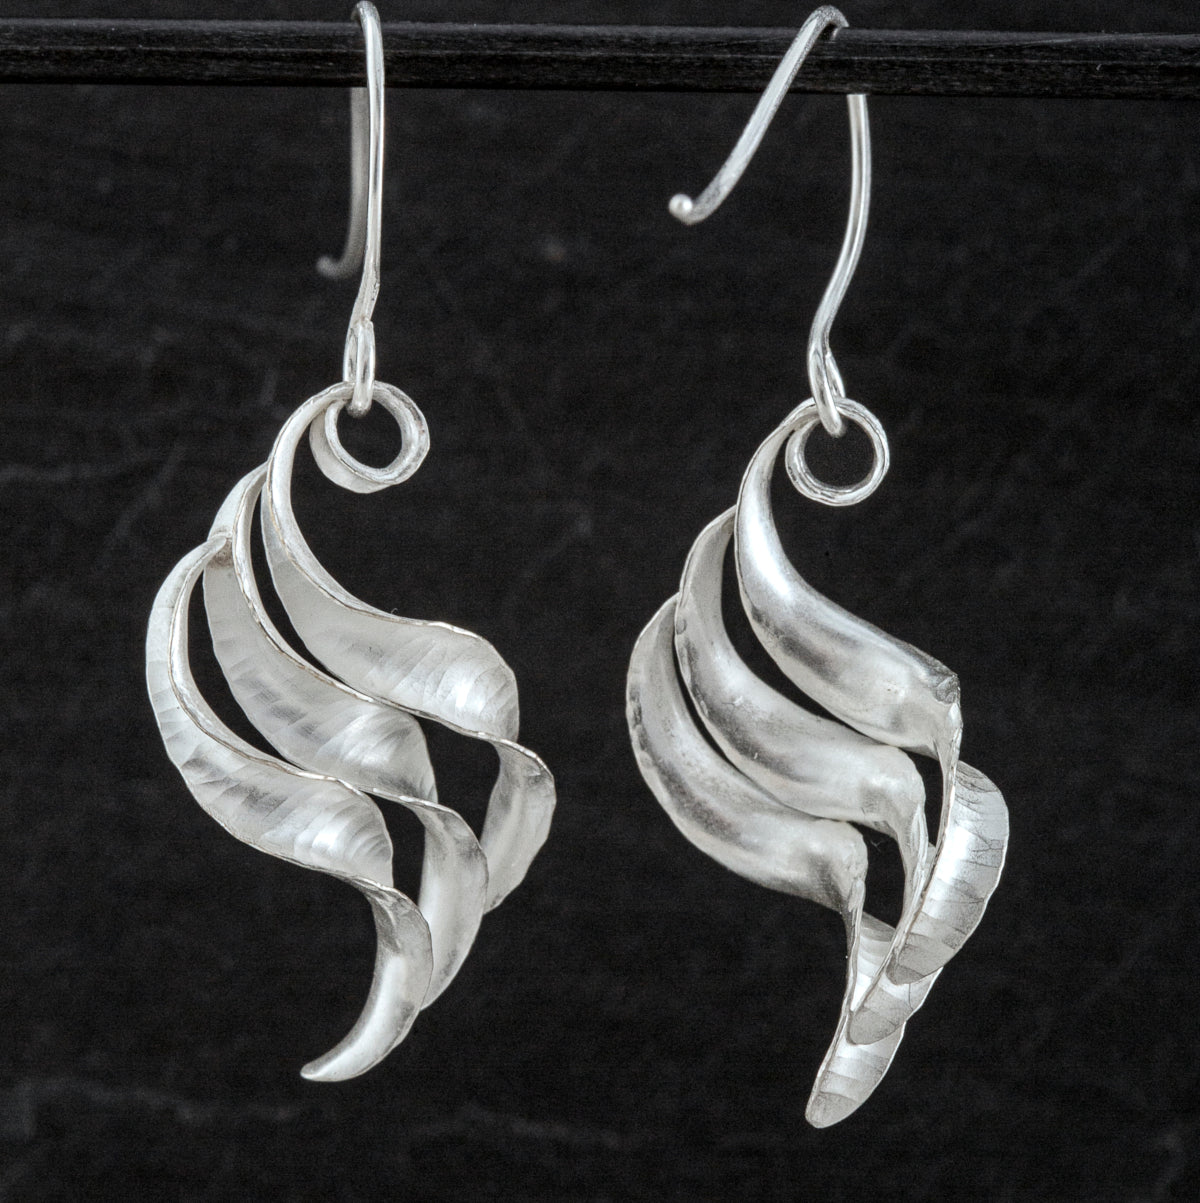 A pair of silver wing earrings made from recycled sterling silver by the process of anticlastic raising. These drop earrings have a hammered texture and non-reflective finish. Each consists of three s-shaped twisted units nested together. Here one is shown fronm the front and one from the back.